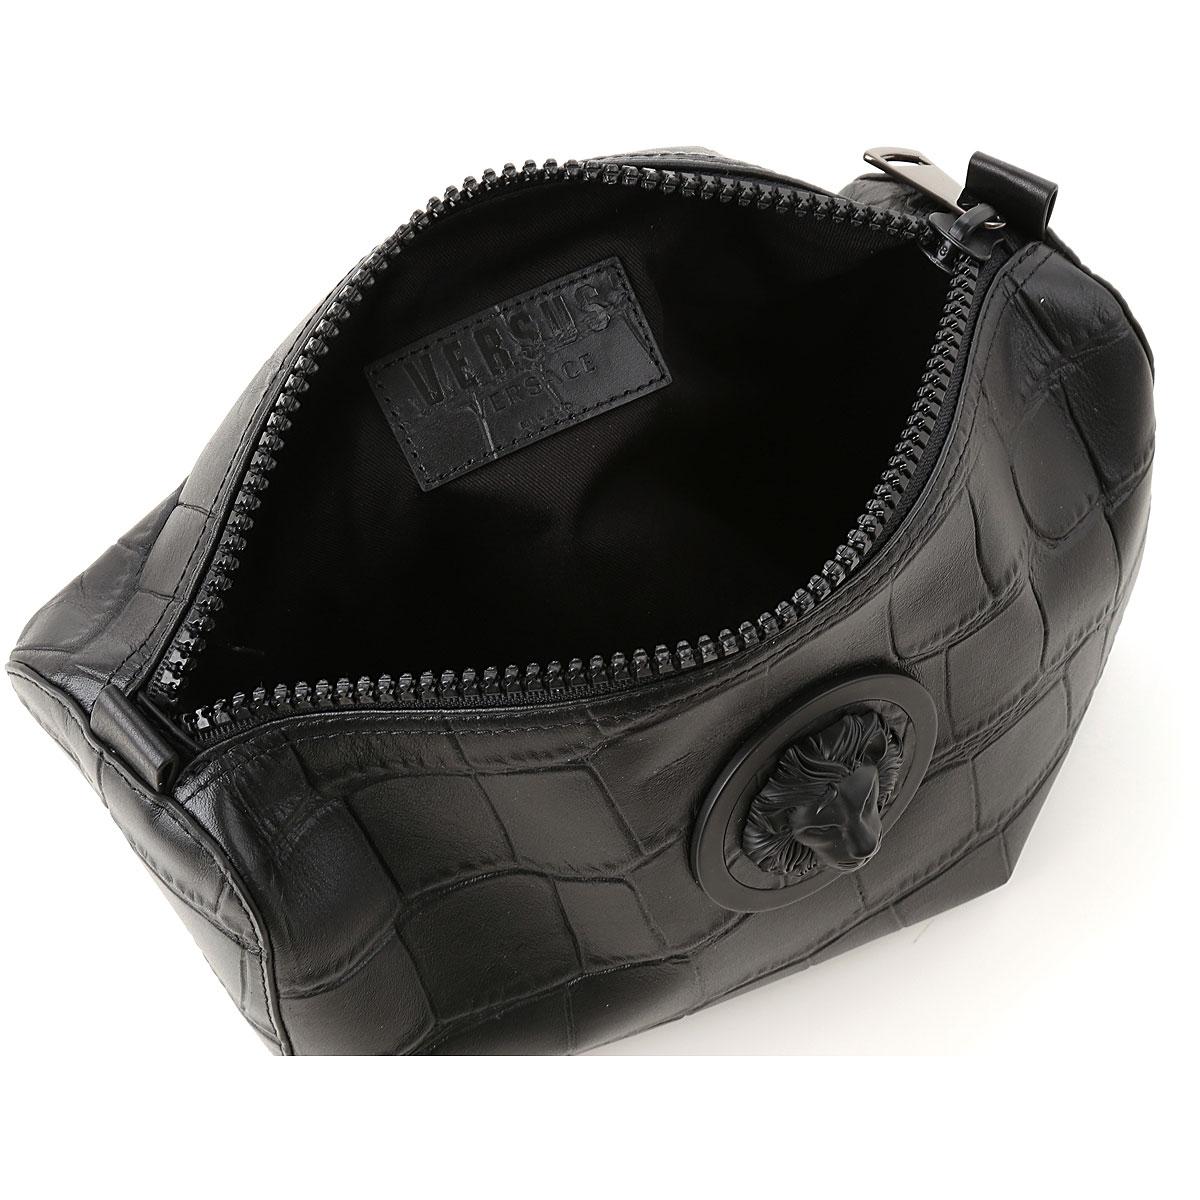 Versace Bags Outlet | SEMA Data Co-op